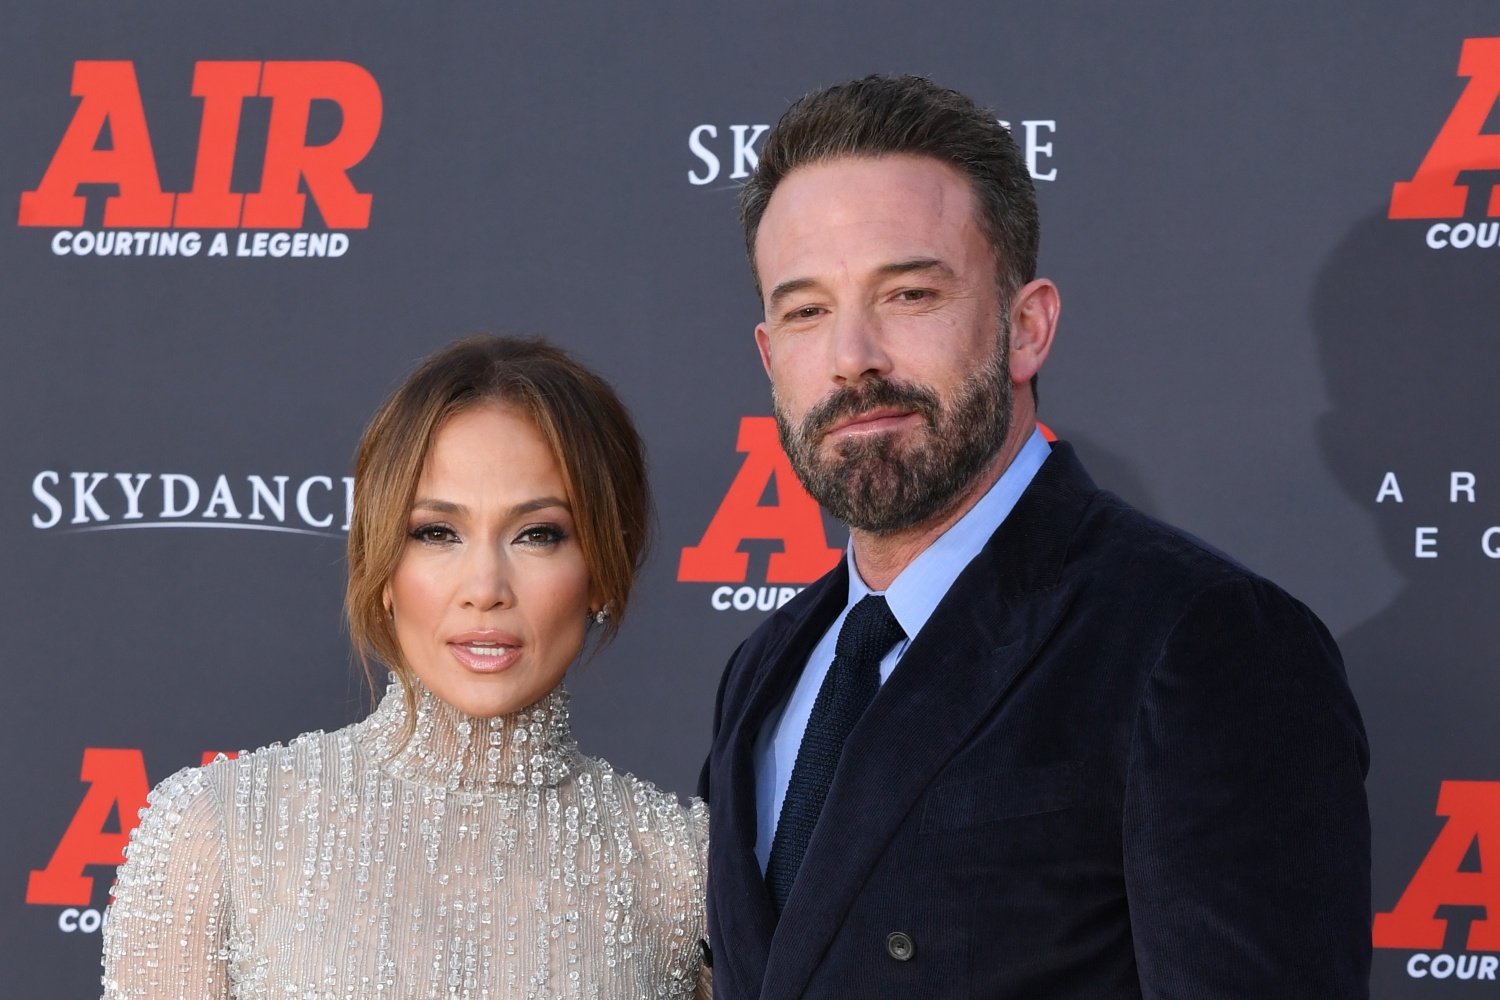 Jennifer Lopez loses hope in Ben Affleck and marriage, instead focuses on 2025 revival tour